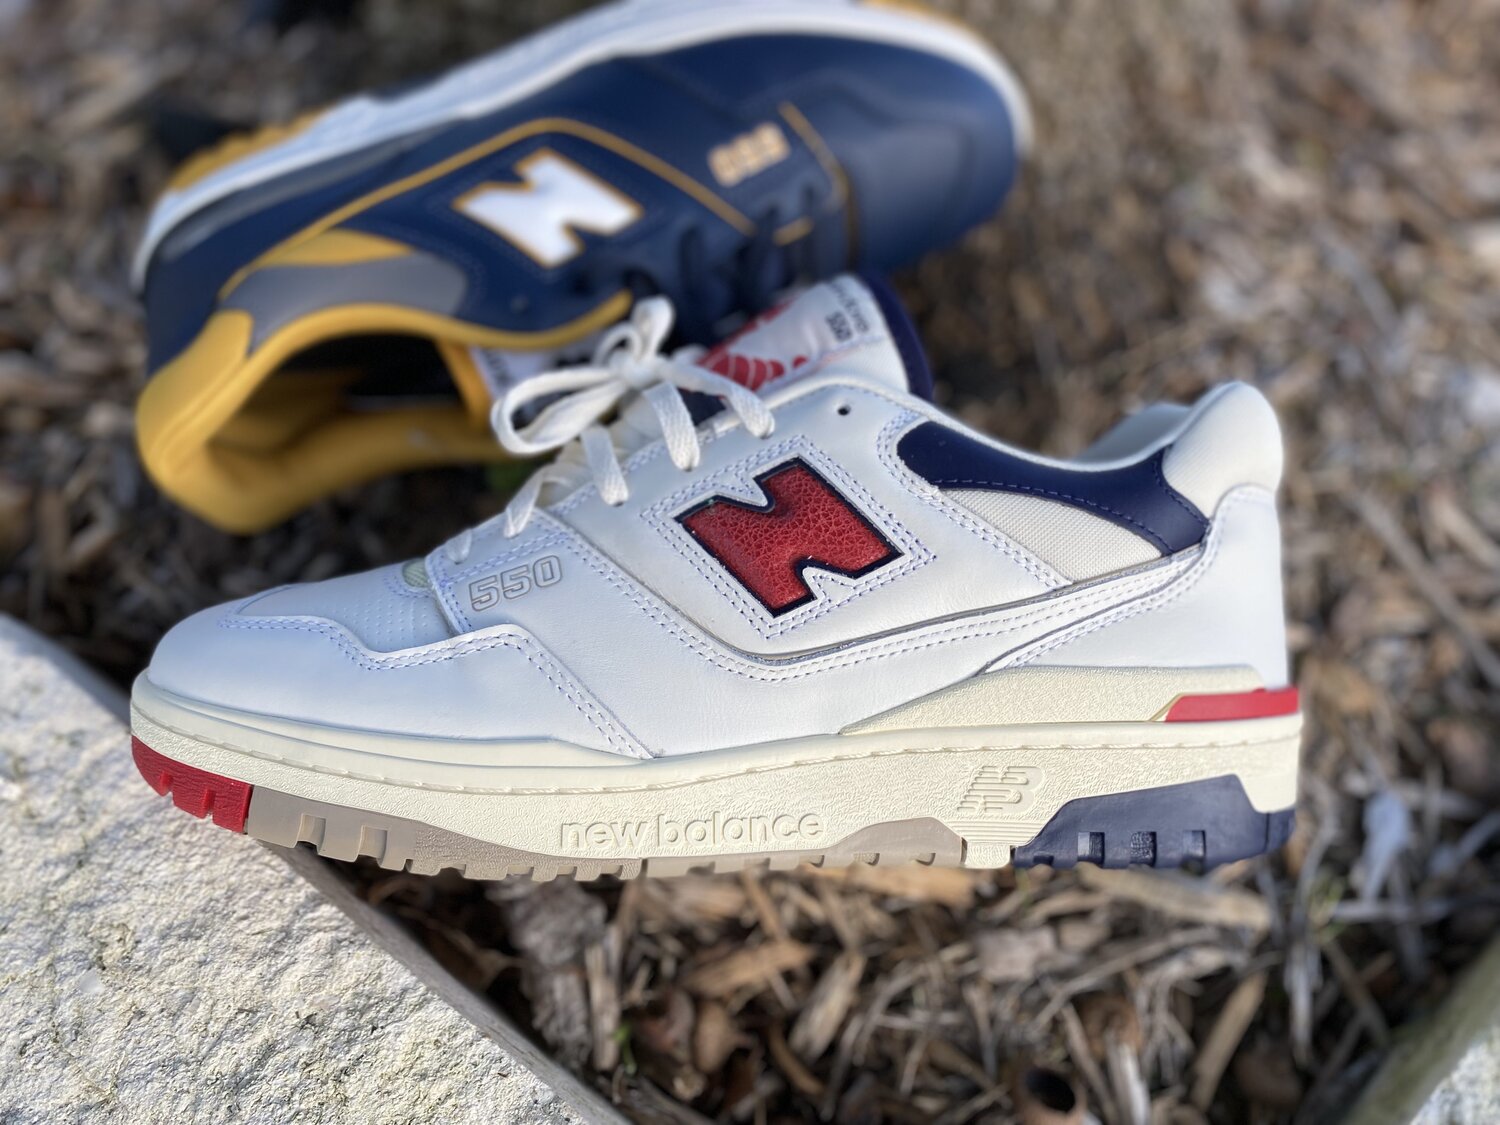 Adoración seré fuerte perder Sizing Guide: How Does The New Balance 550 Fit? | The Retro Insider